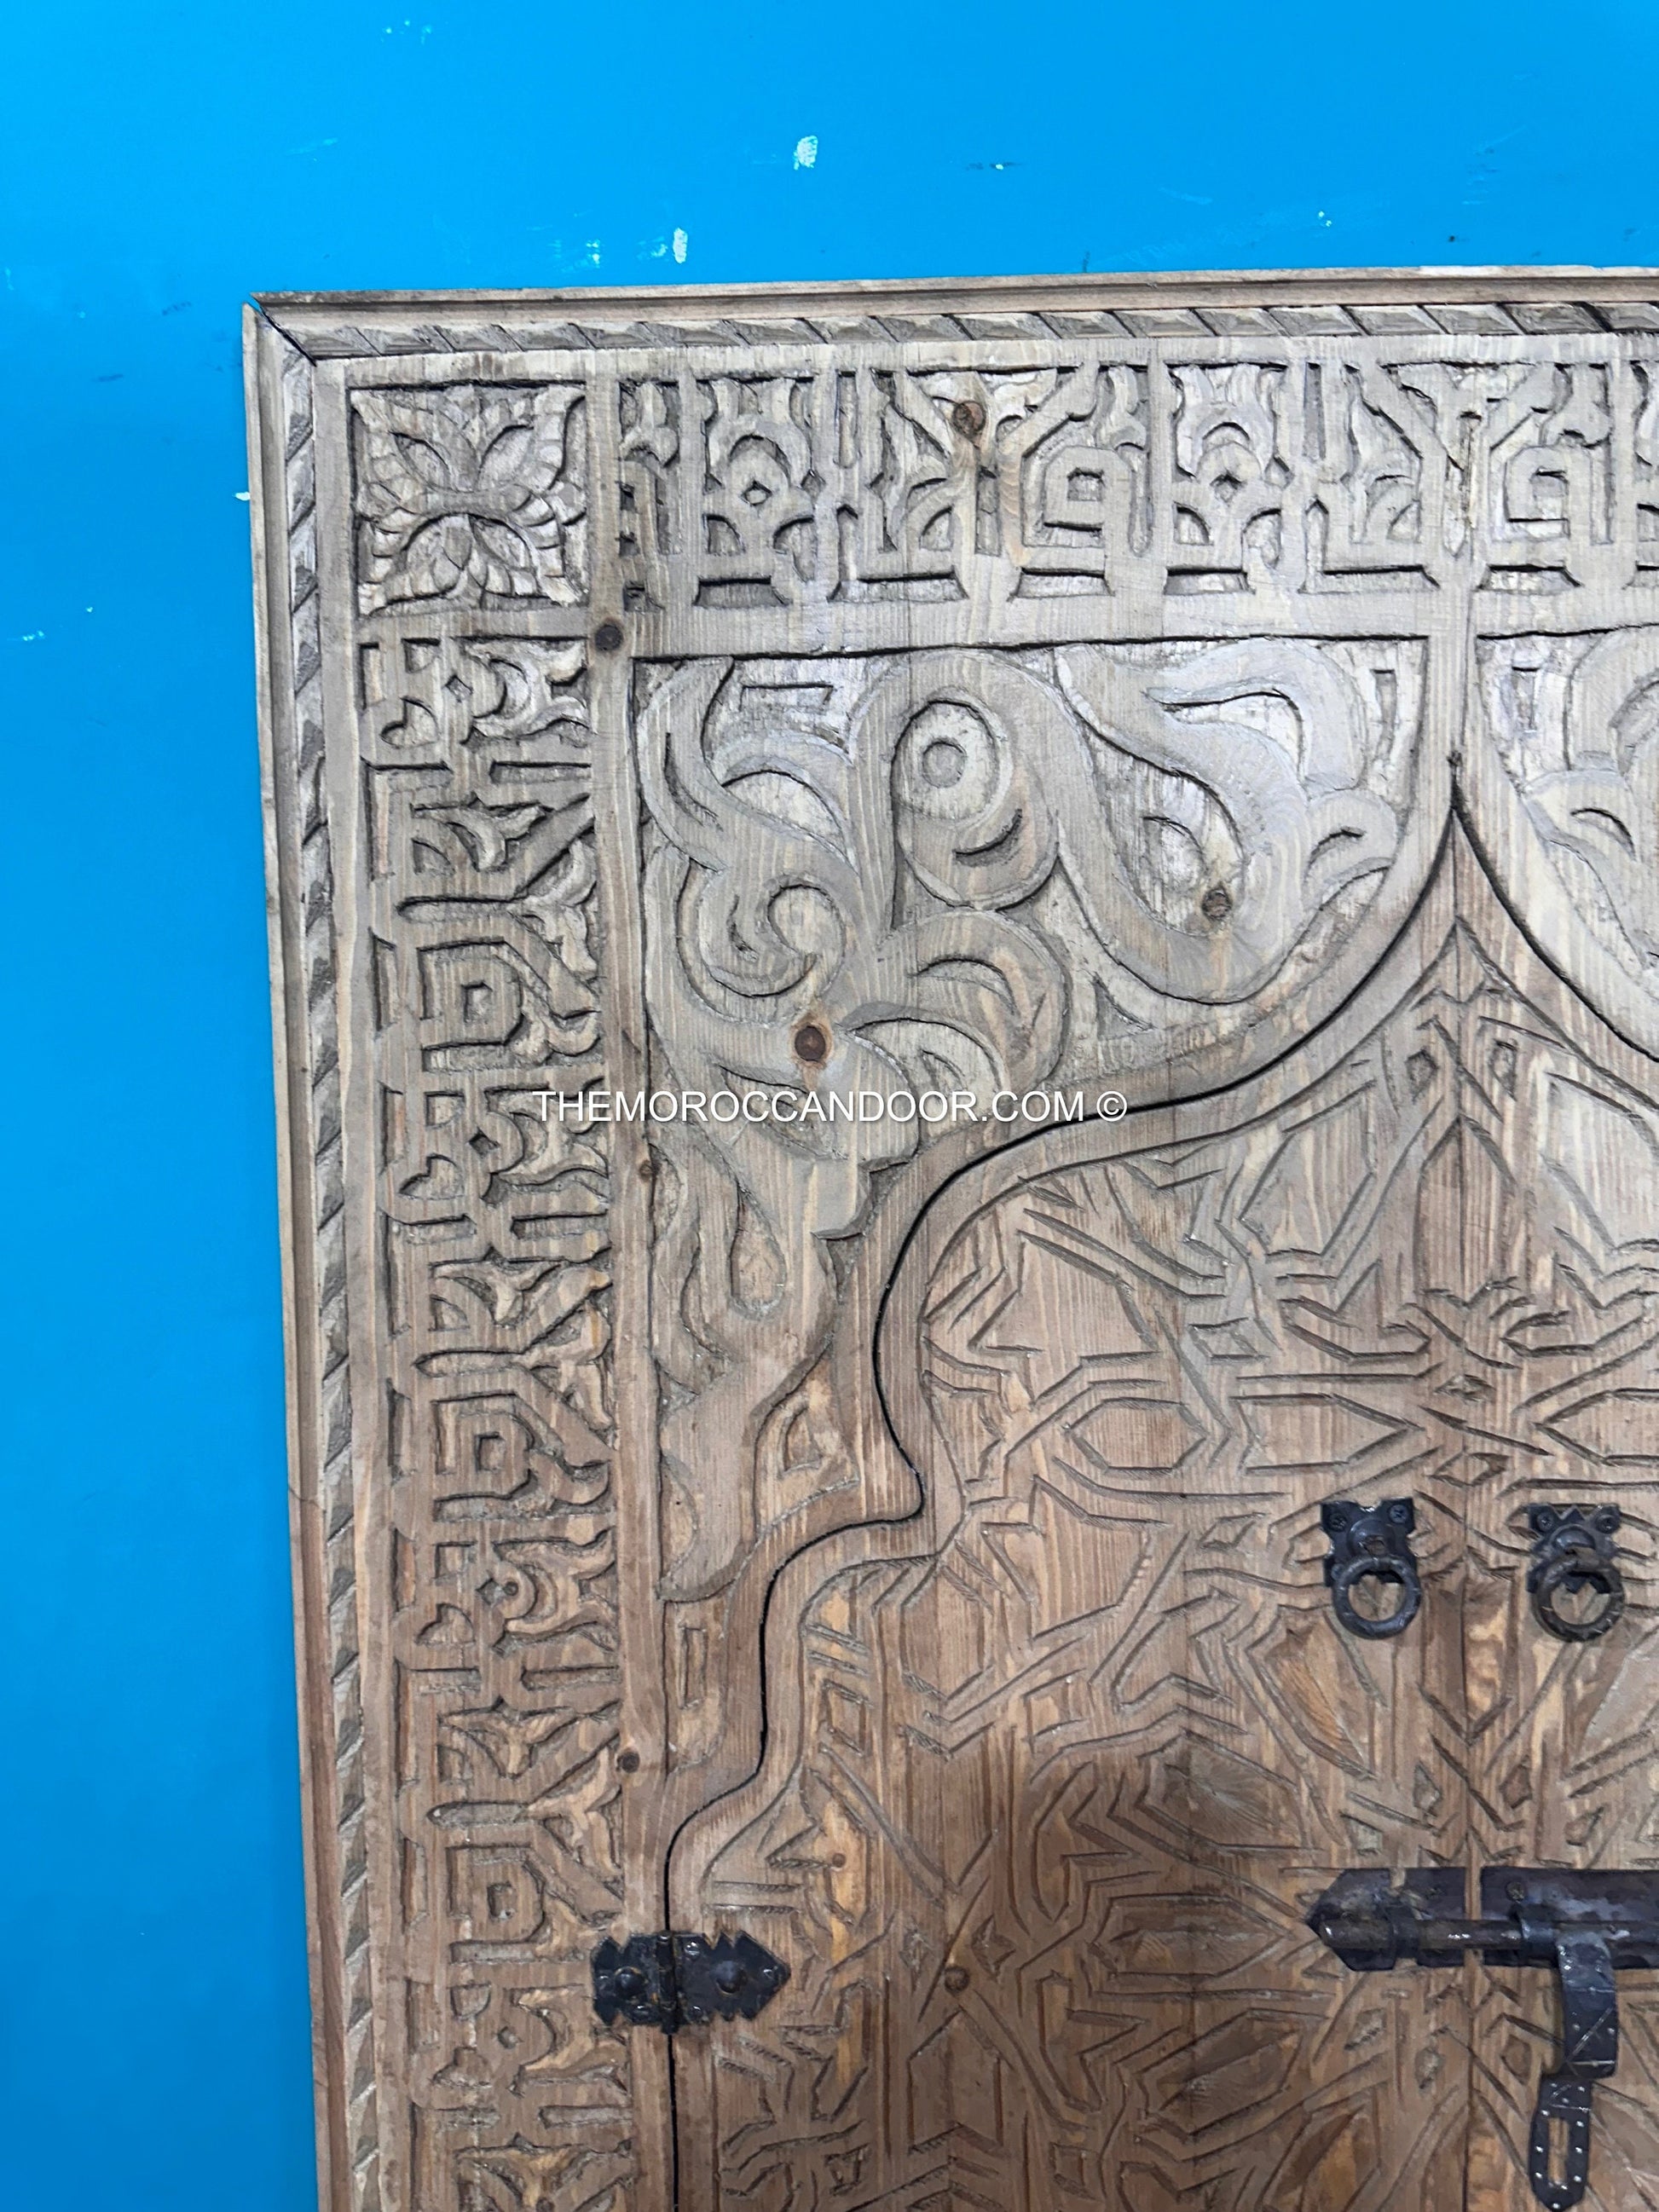 Hand-carved wooden Moroccan vintage window with a brass lock and handle, ready to ship in a beautiful brown wood frame for your wall.